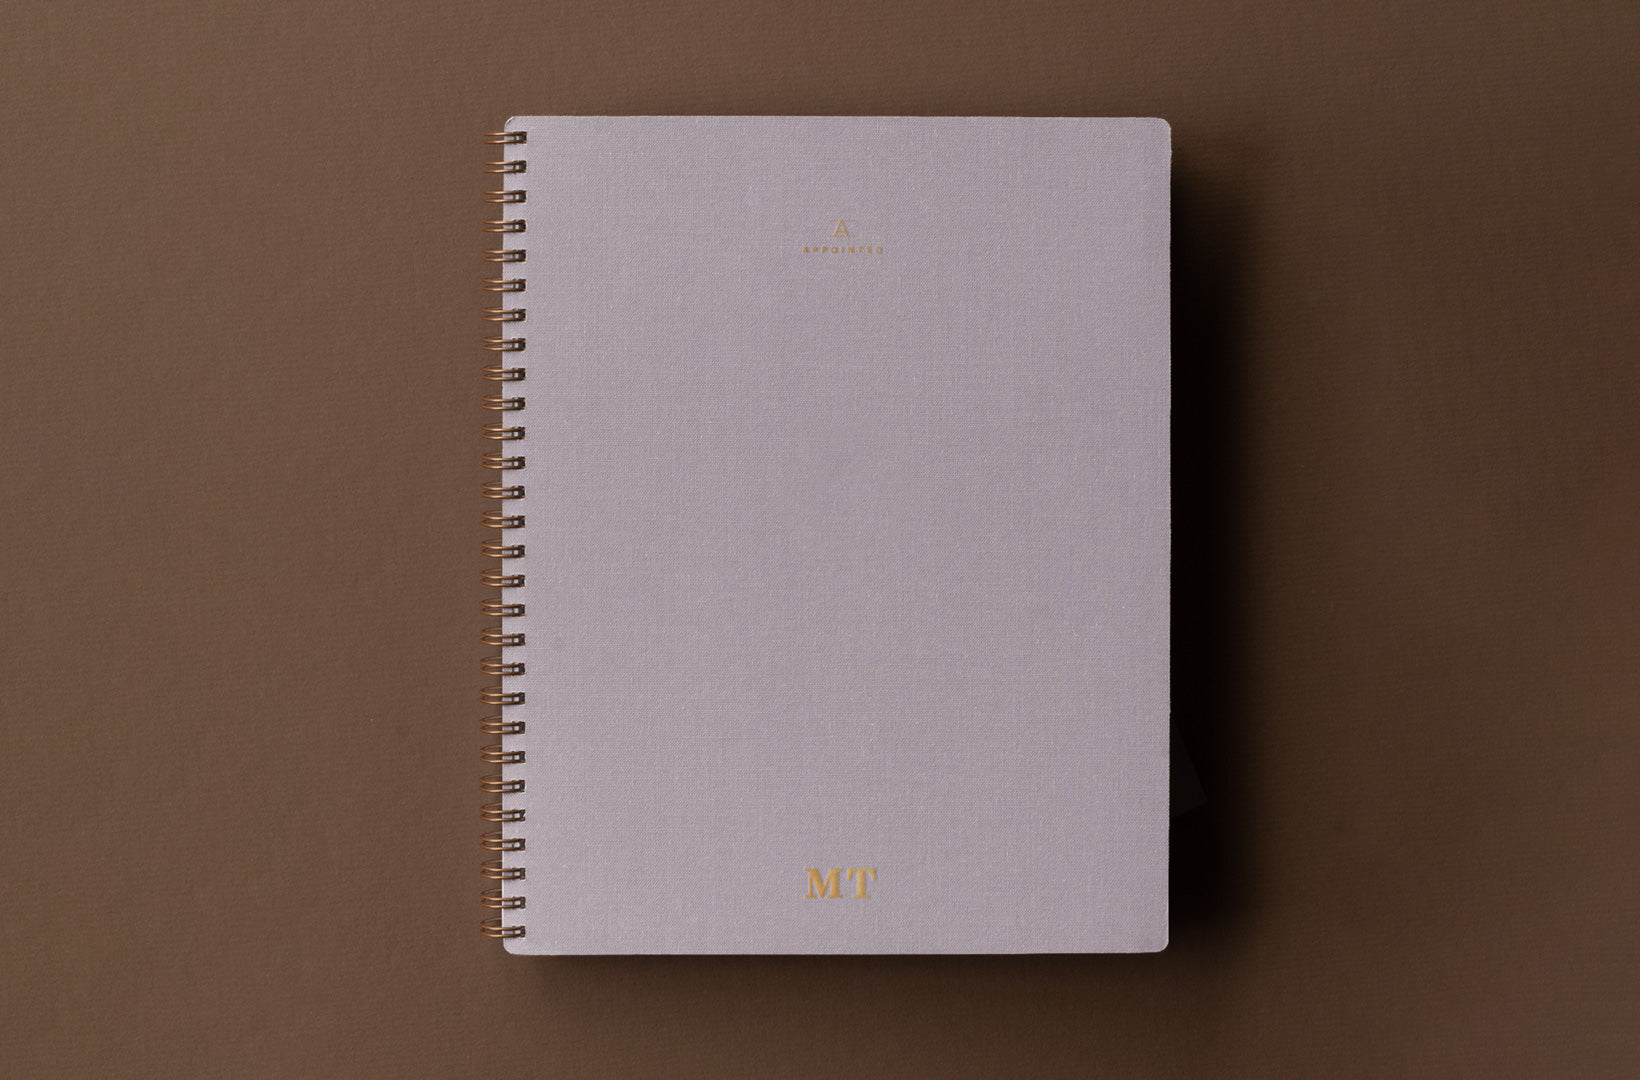 A lavender gray notebook with wire-o binding and gold foil monogram sits against a brown background